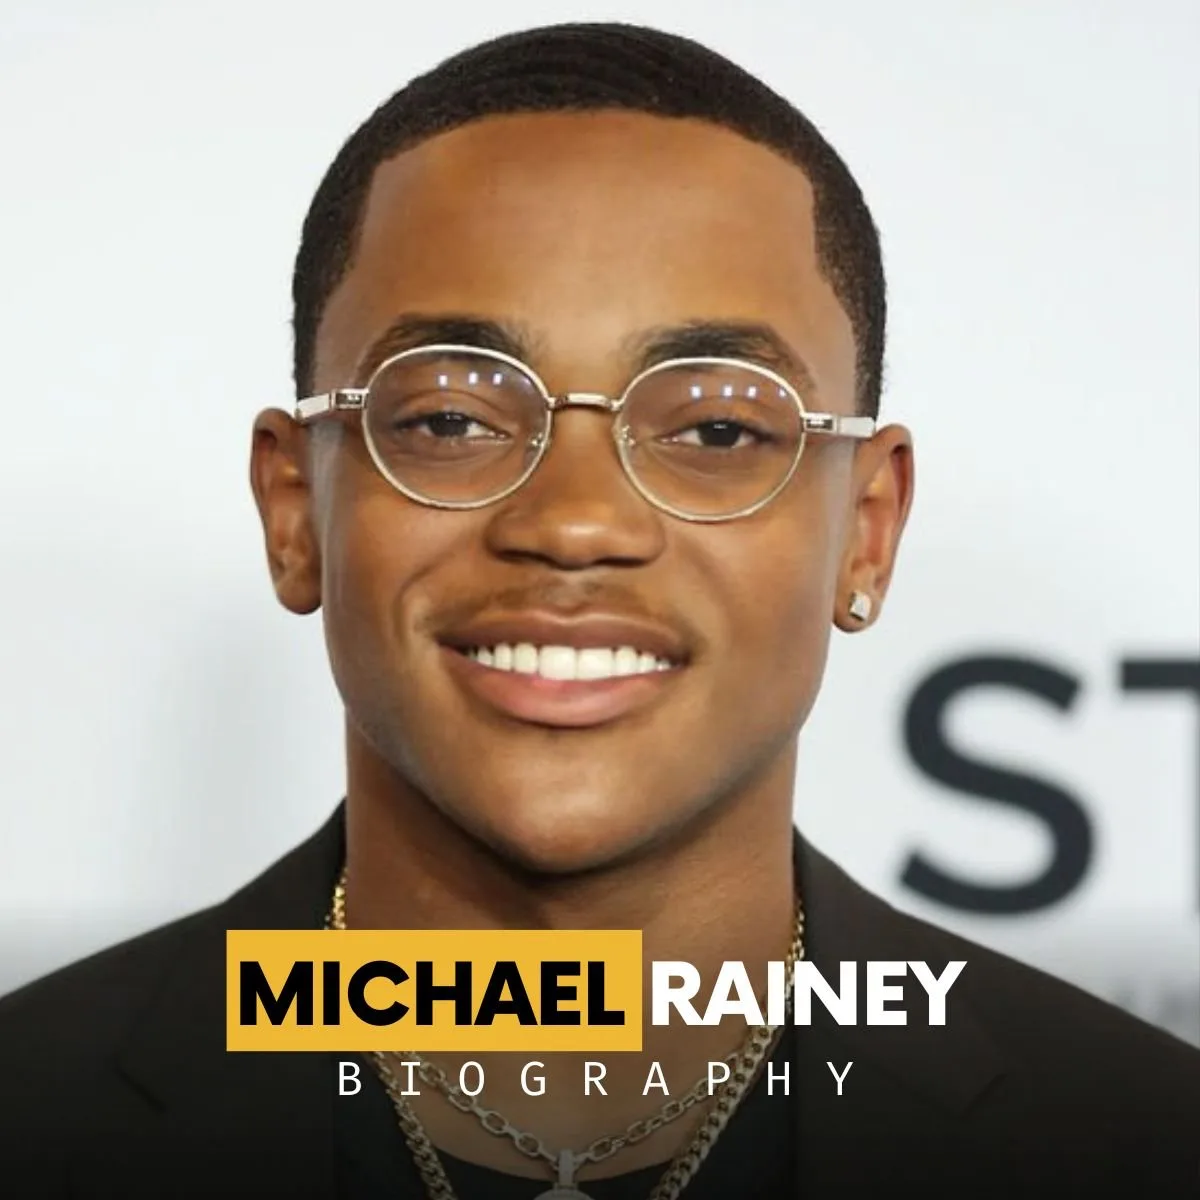 Picture of Michael Rainey Jr. from an event